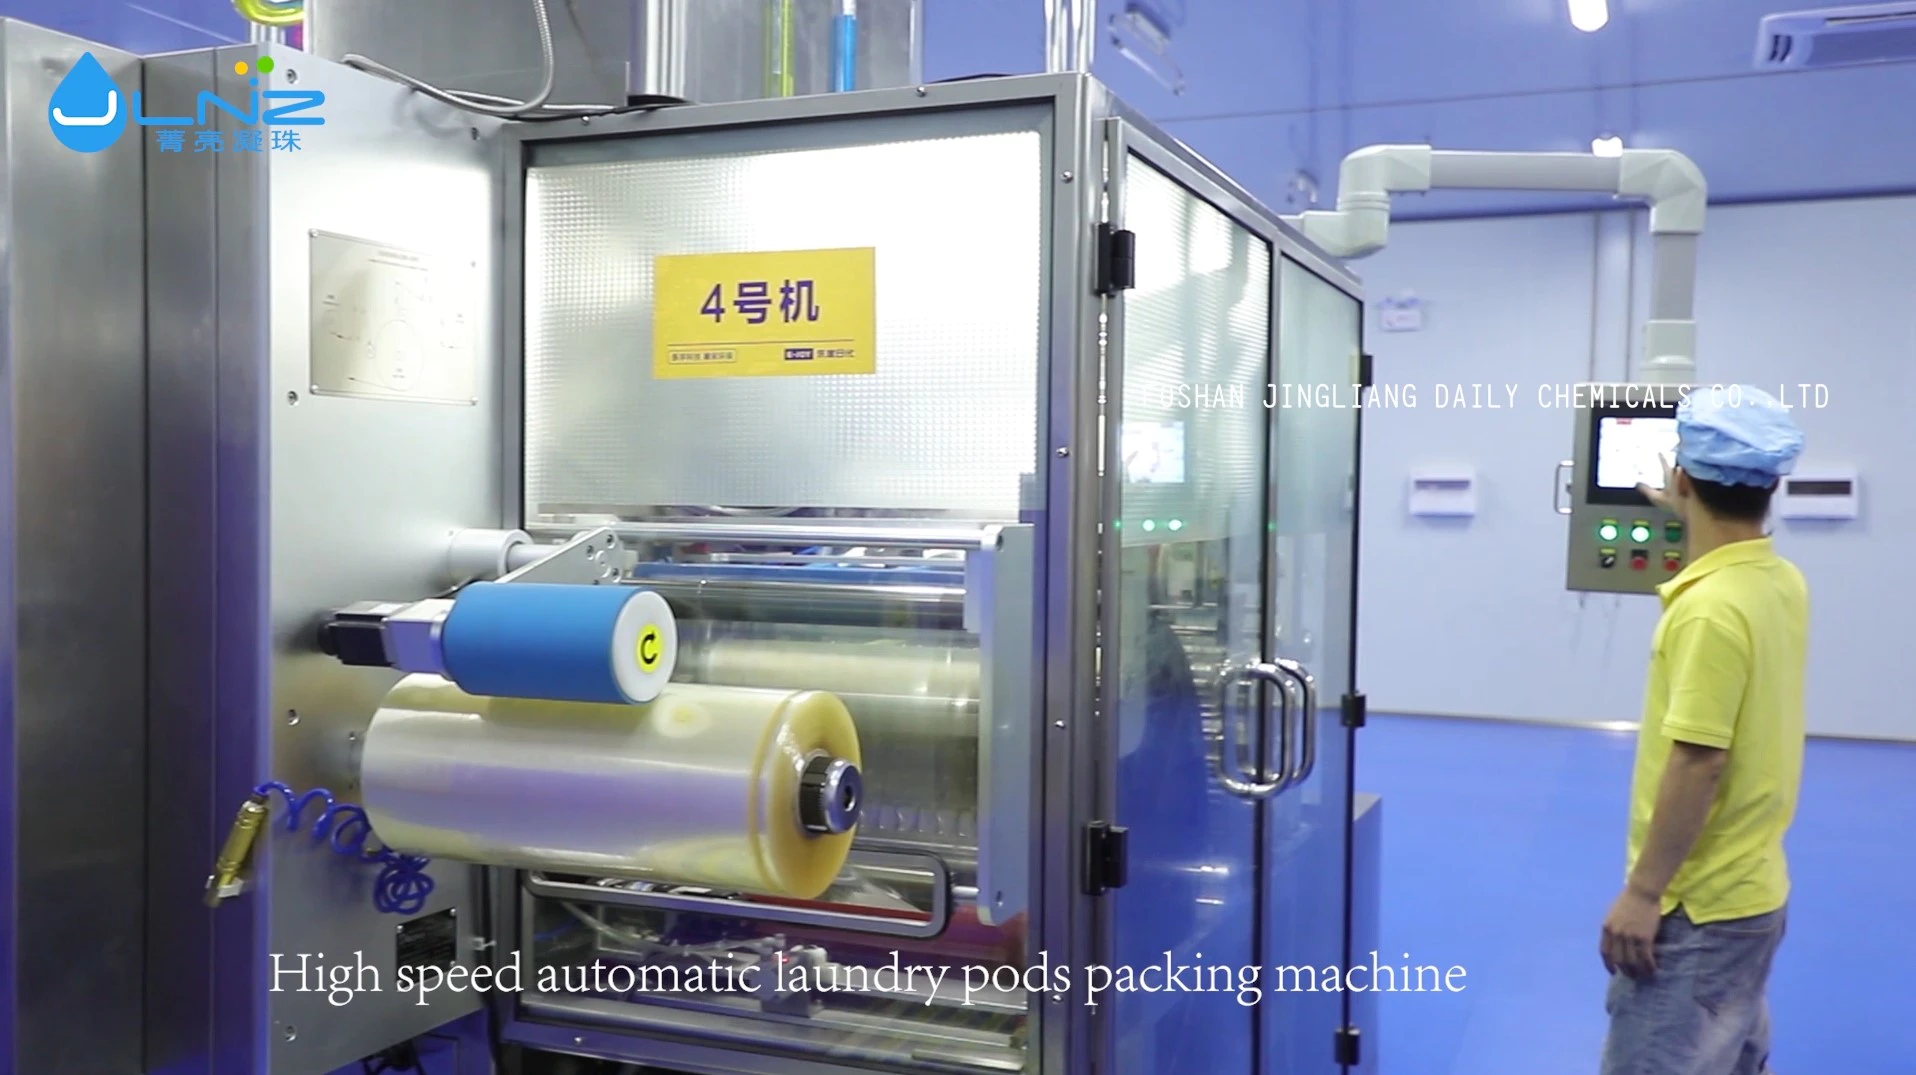 High speed automatic laundry pods packing machine